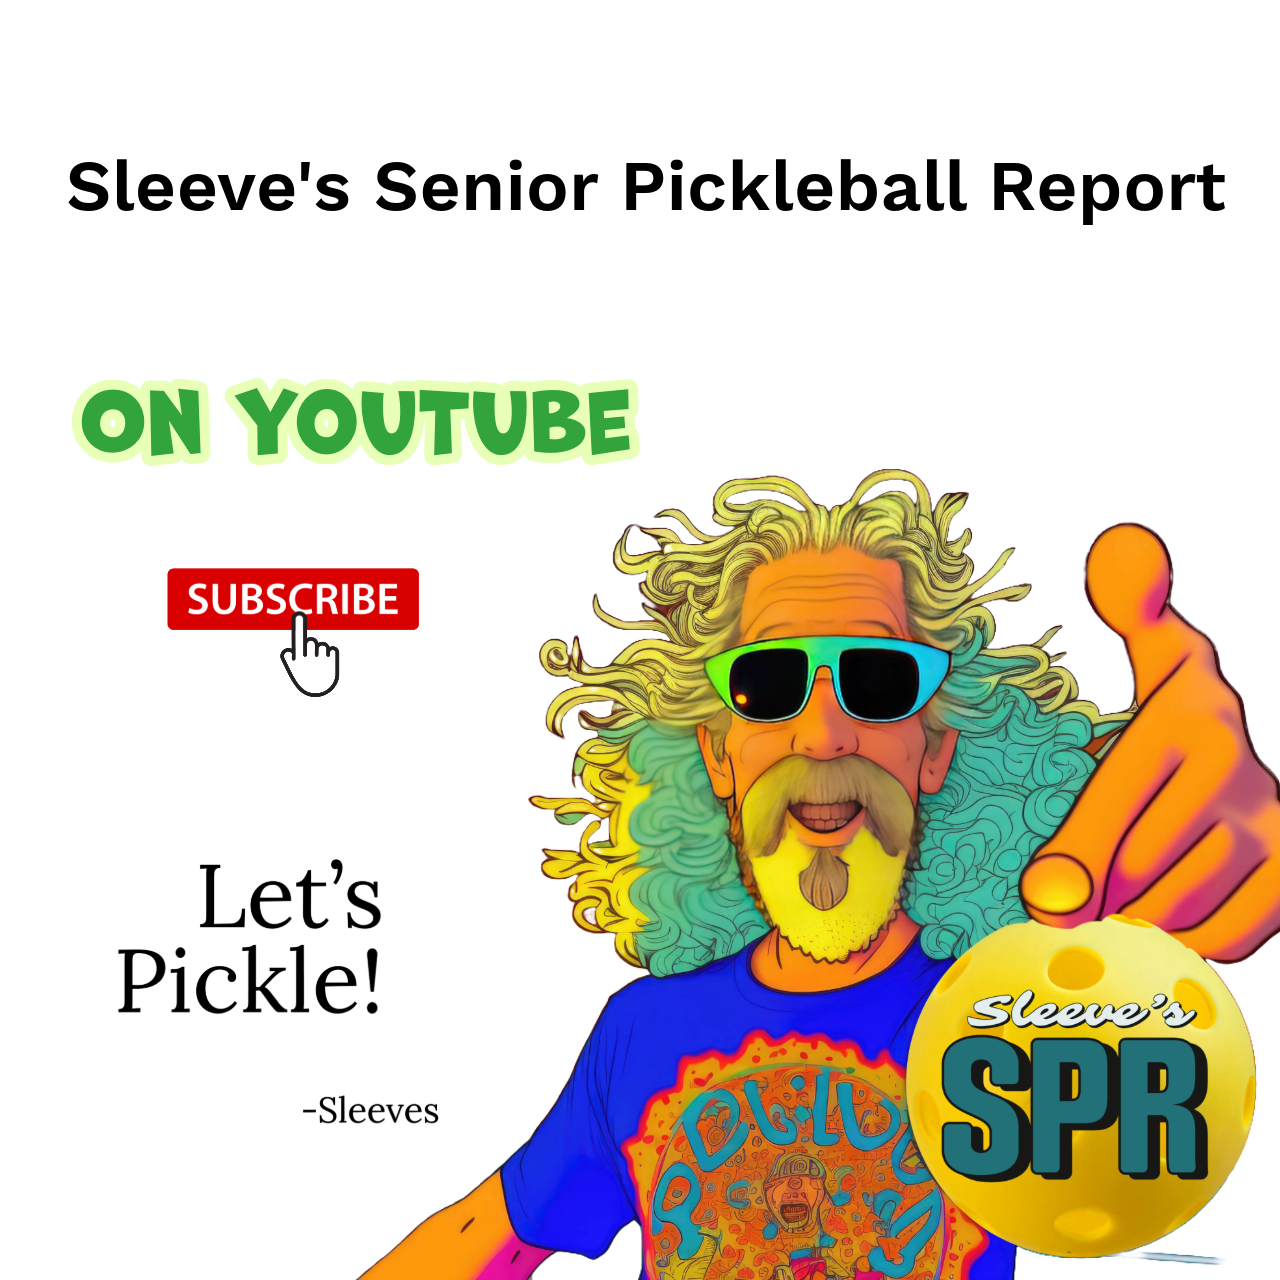 STM Daily News: Special Guest Mike Sleeves Sliwa on Sleeves' Senior Pickleball Report